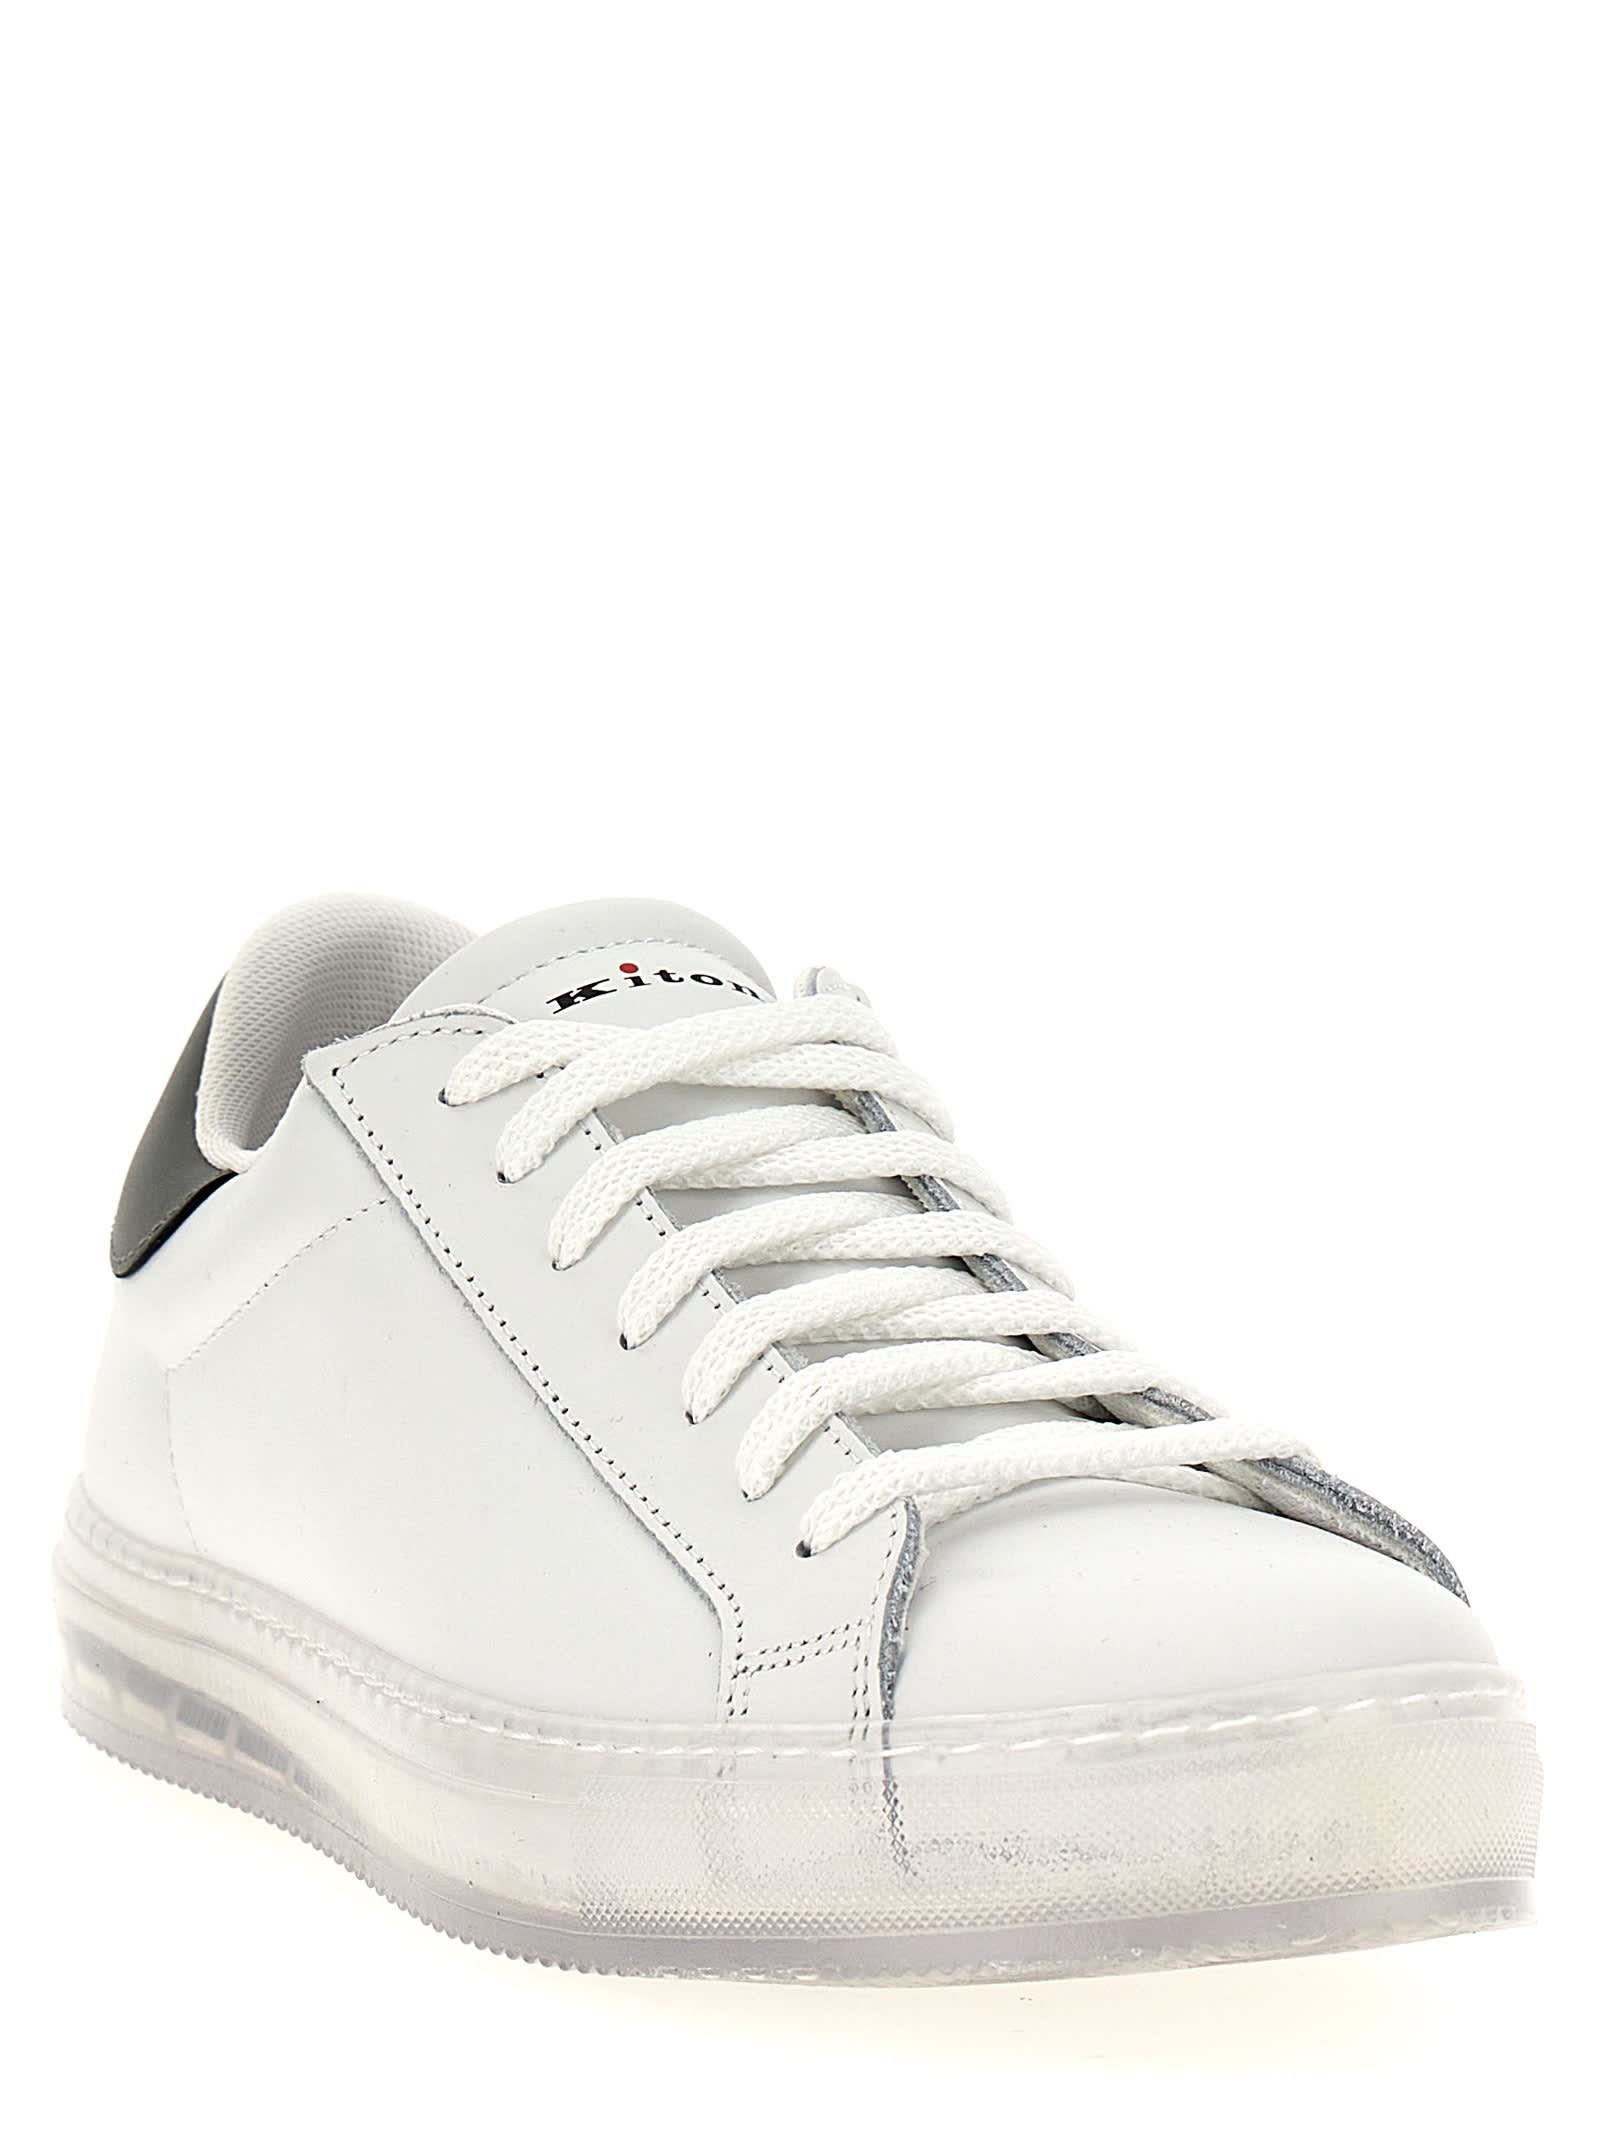 Shop Kiton Ussa088 Sneakers In Gray